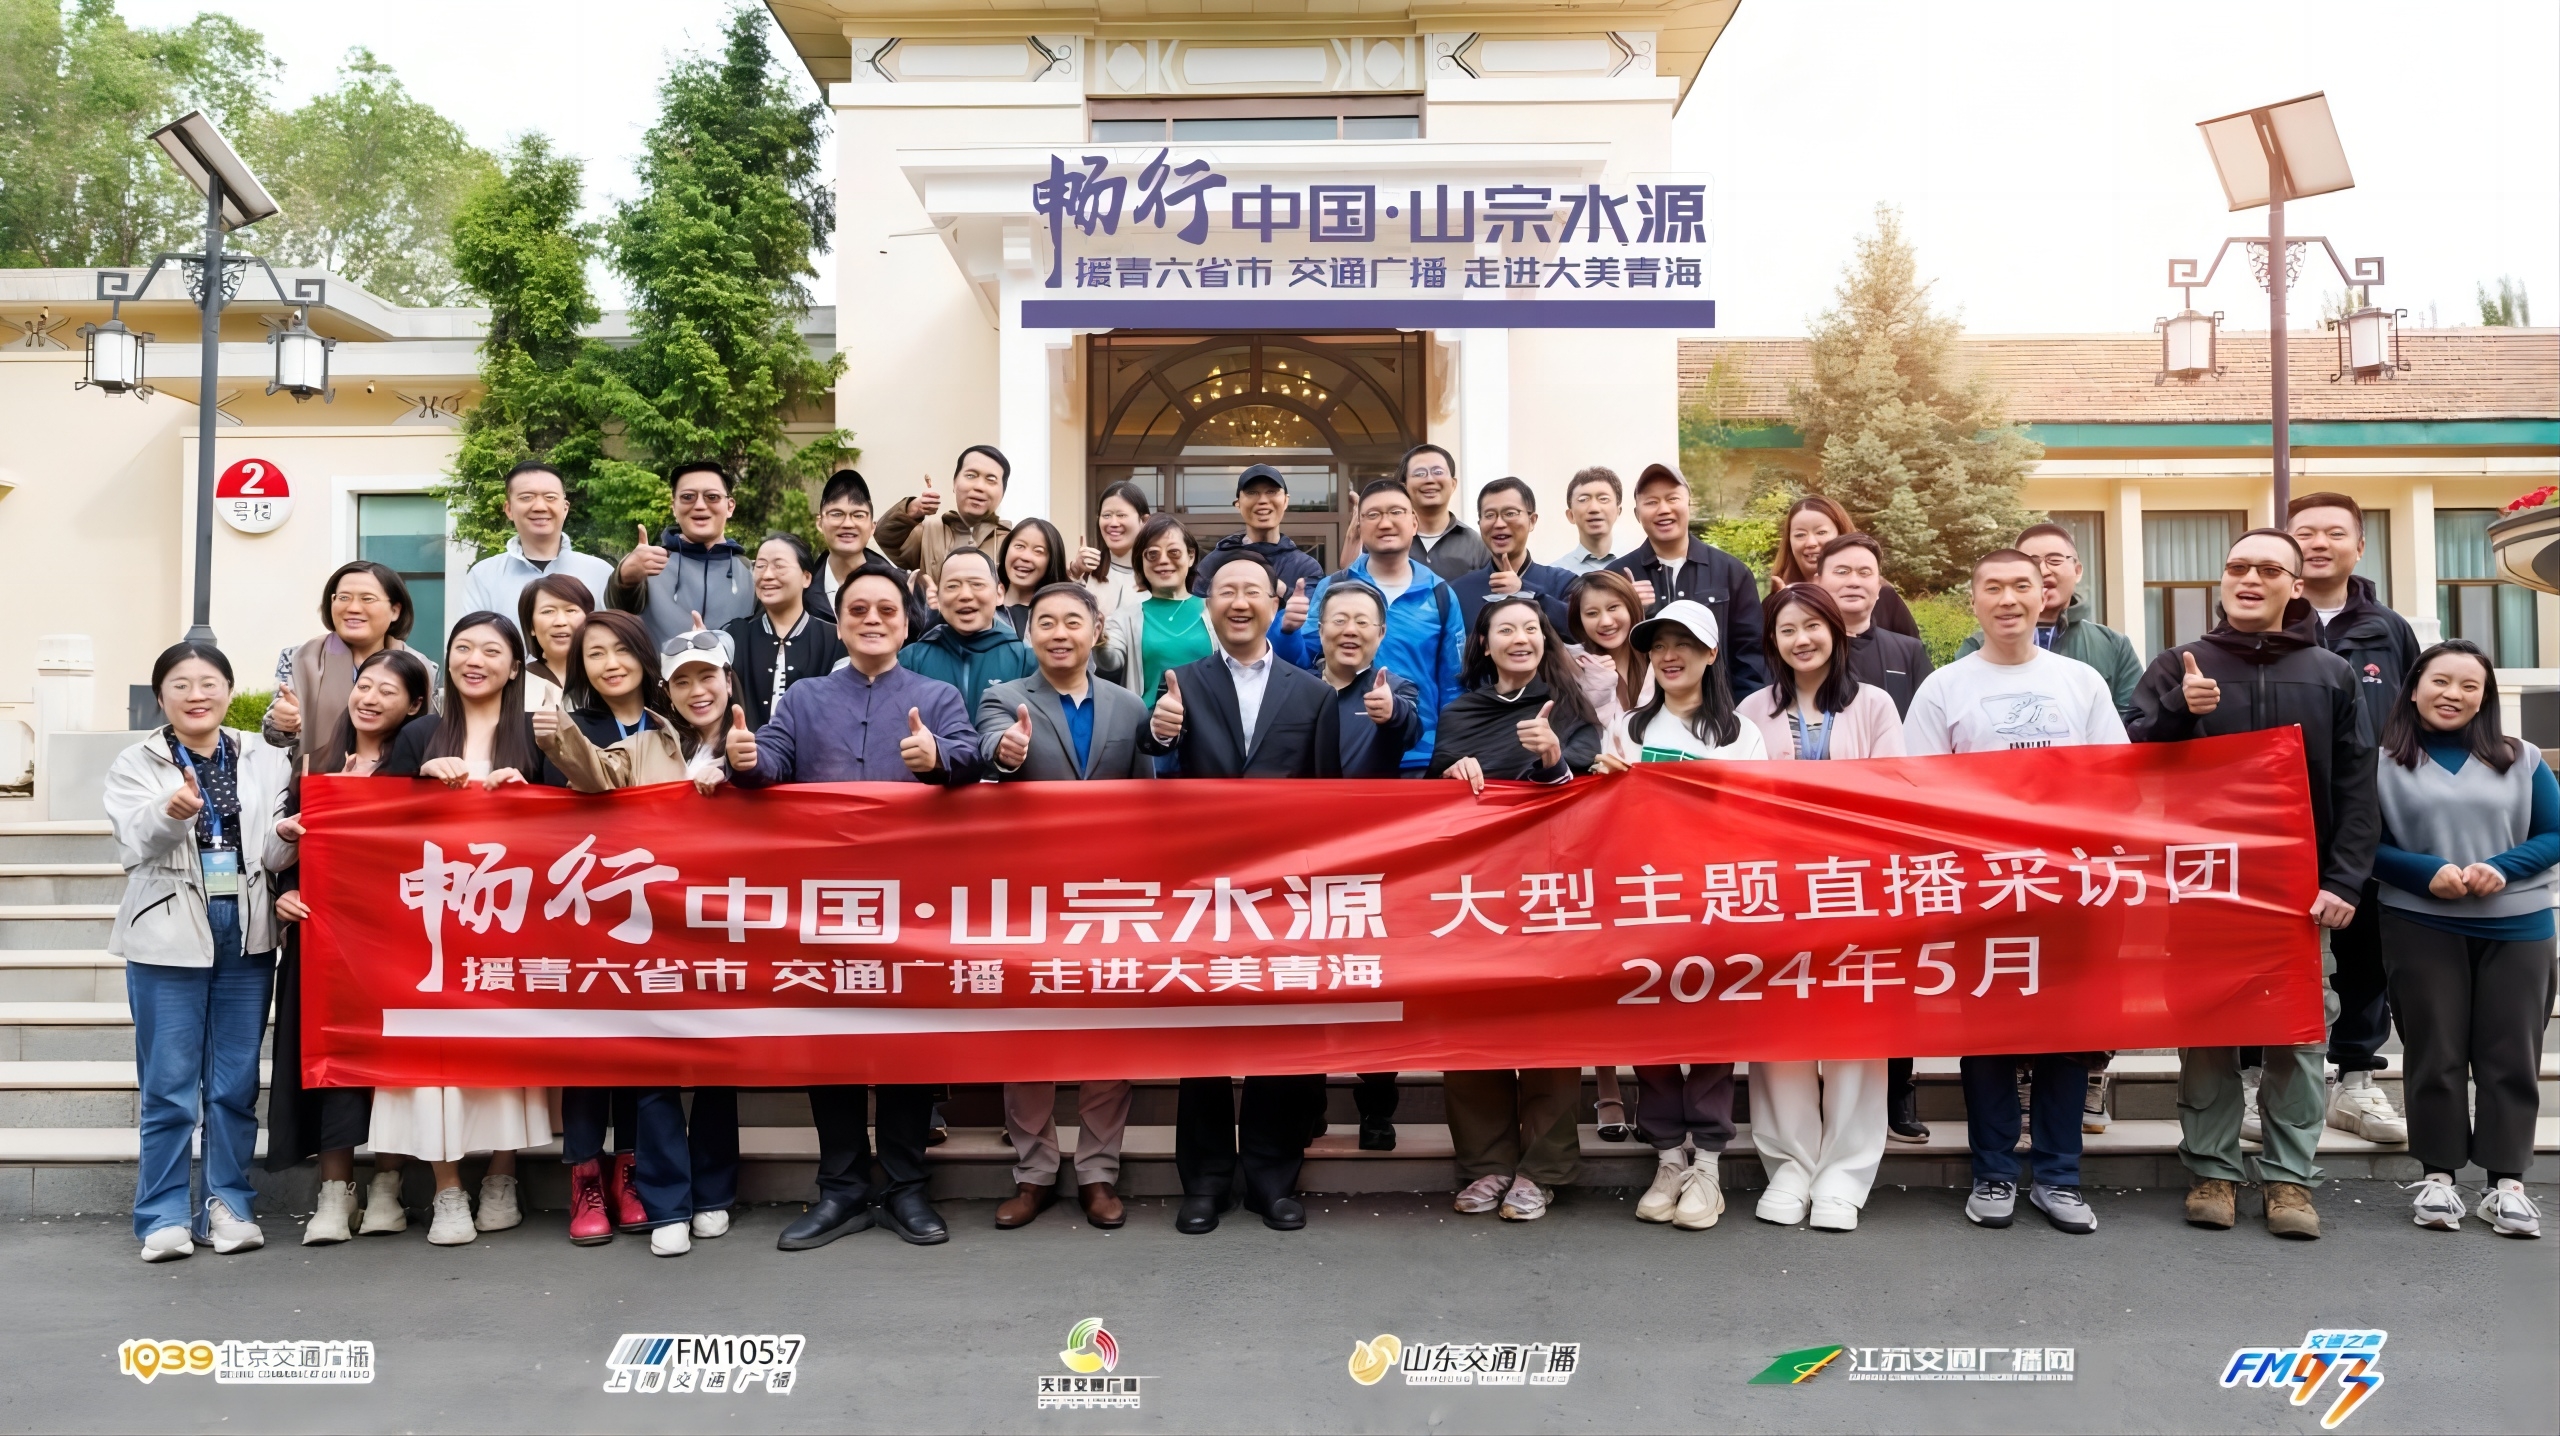  The Transport Publicity Committee of the China Guangzhou Federation launched the live broadcast series of large-scale theme activities of "mountains, rivers and beautiful Qinghai" in six provinces and cities of China · Qingdao aid in 2024_forder_8